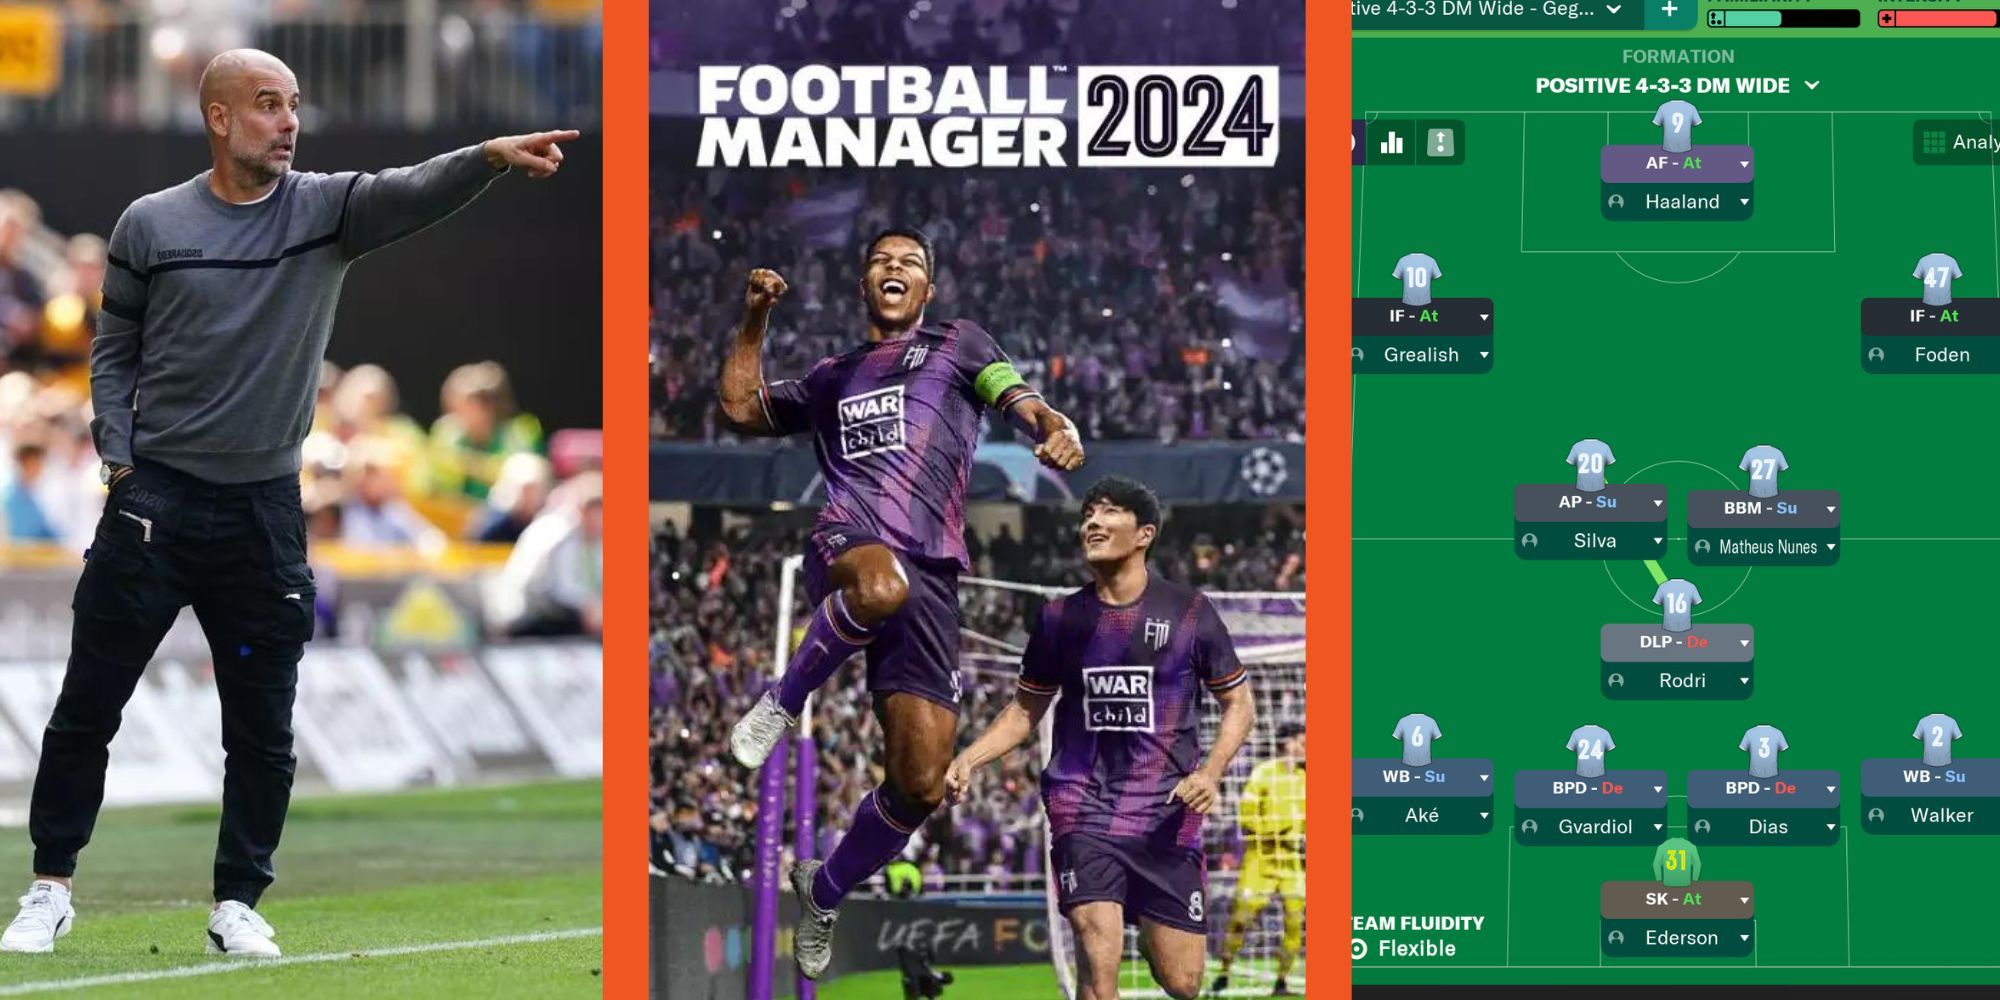 Best Formations In Football Manager 2024